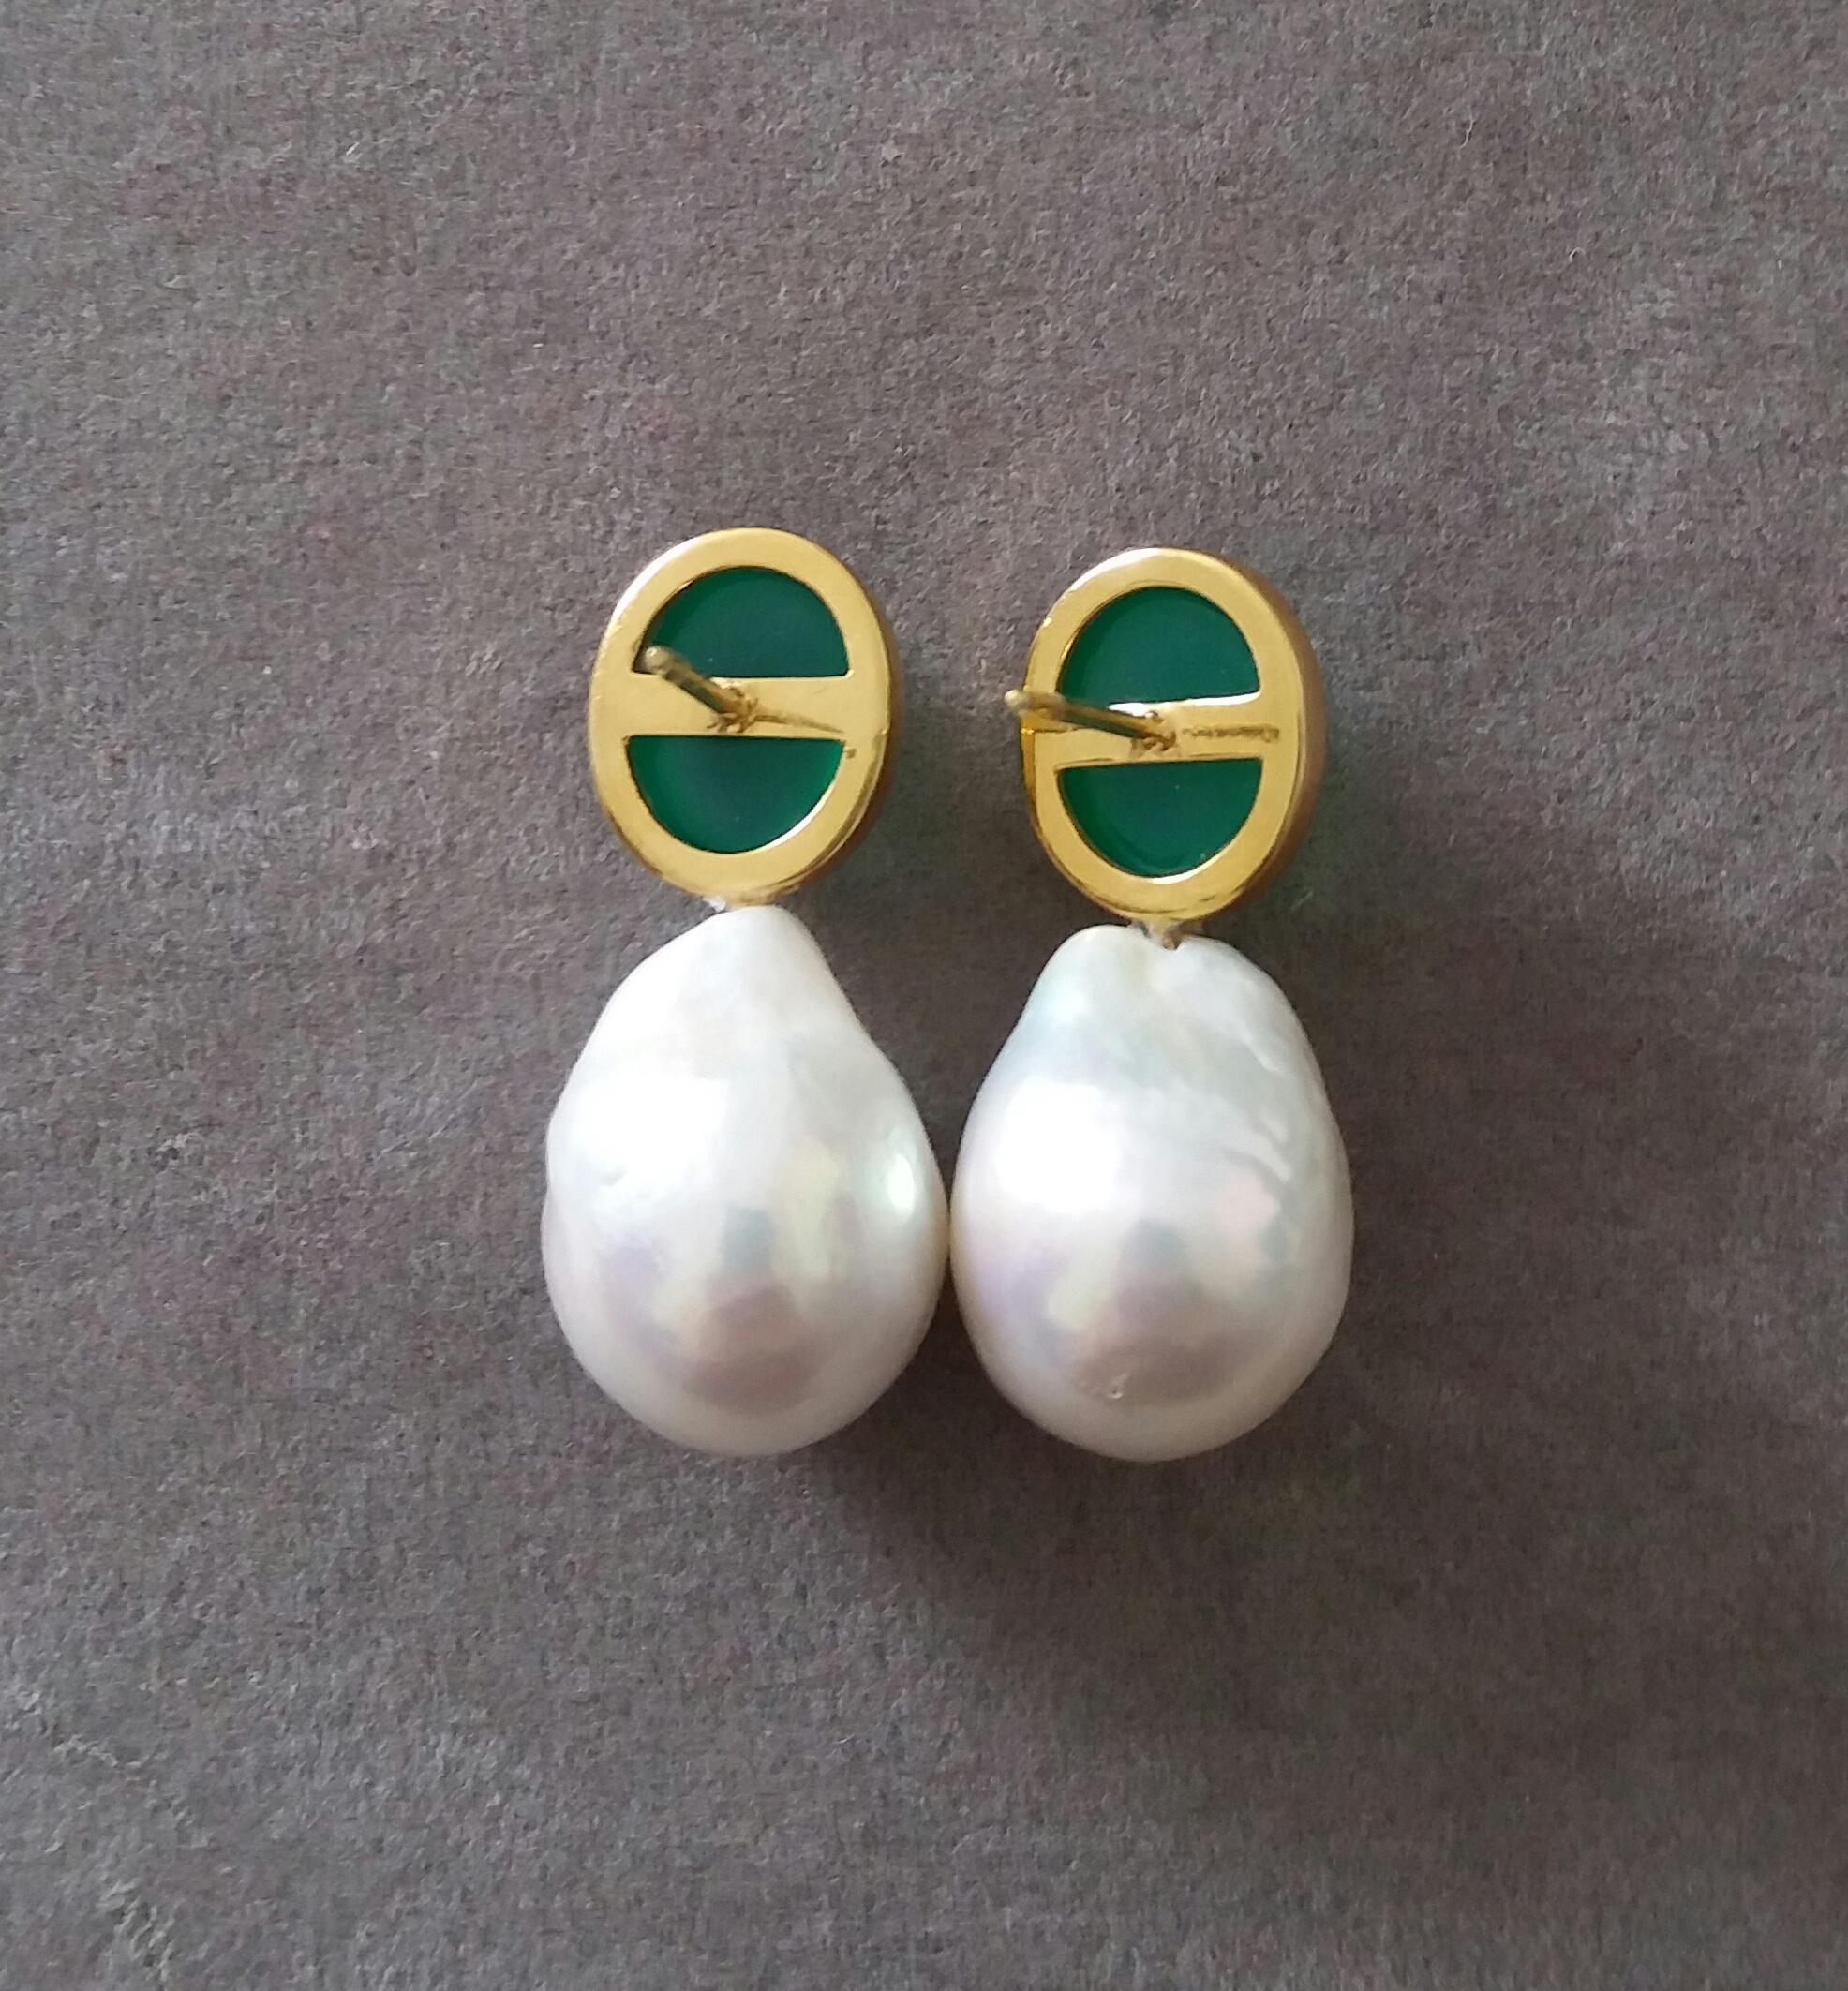 Contemporary Oval Shape Green Onyx Cabs 14 Kt Yellow Gold Bezel Baroque Pearls Stud Earrings